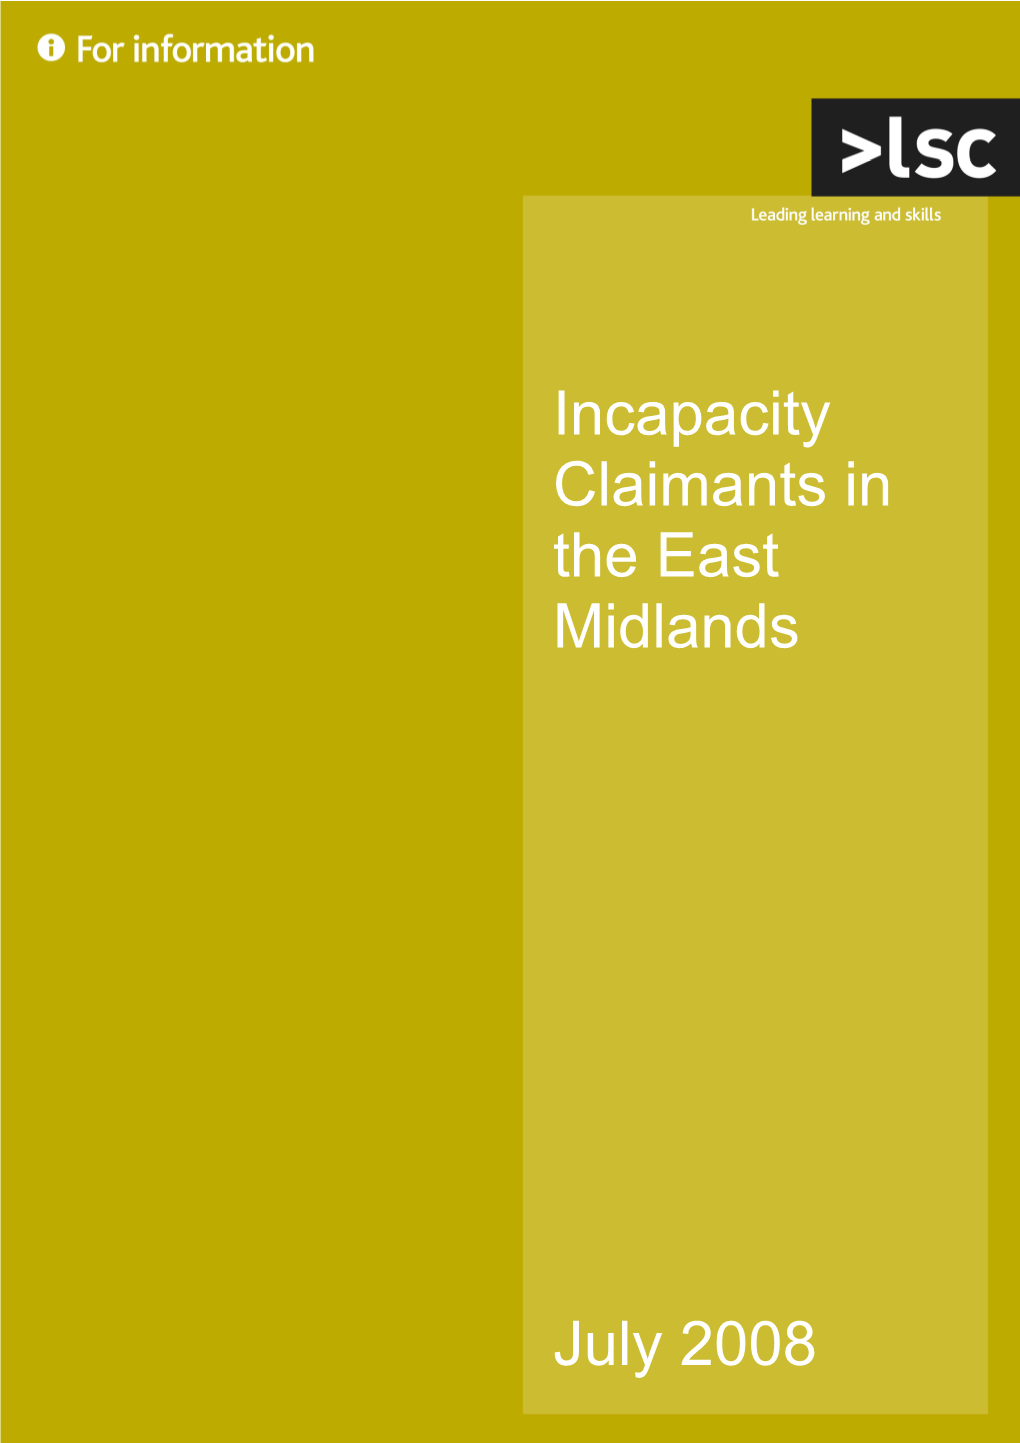 Incapacity Claimants in the East Midlands